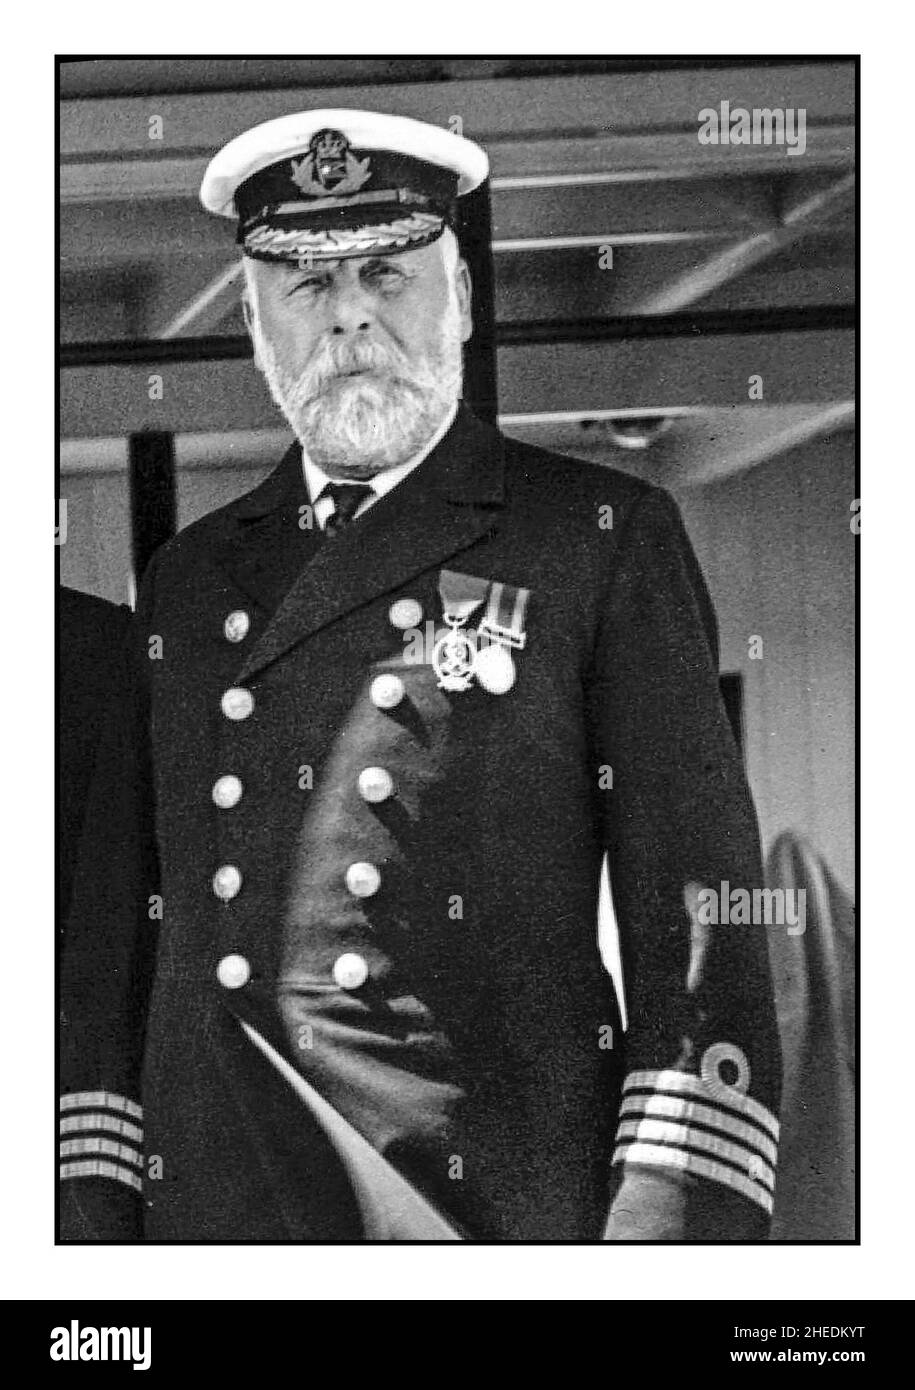 TITANIC CAPTAIN EDWARD SMITH 9th June 1911 .Captain Edward Smith most famous for his role at the helm of the Titanic, Captain during the disastrous last voyage and sinking of the Titanic. He went down with his ship. Stock Photo